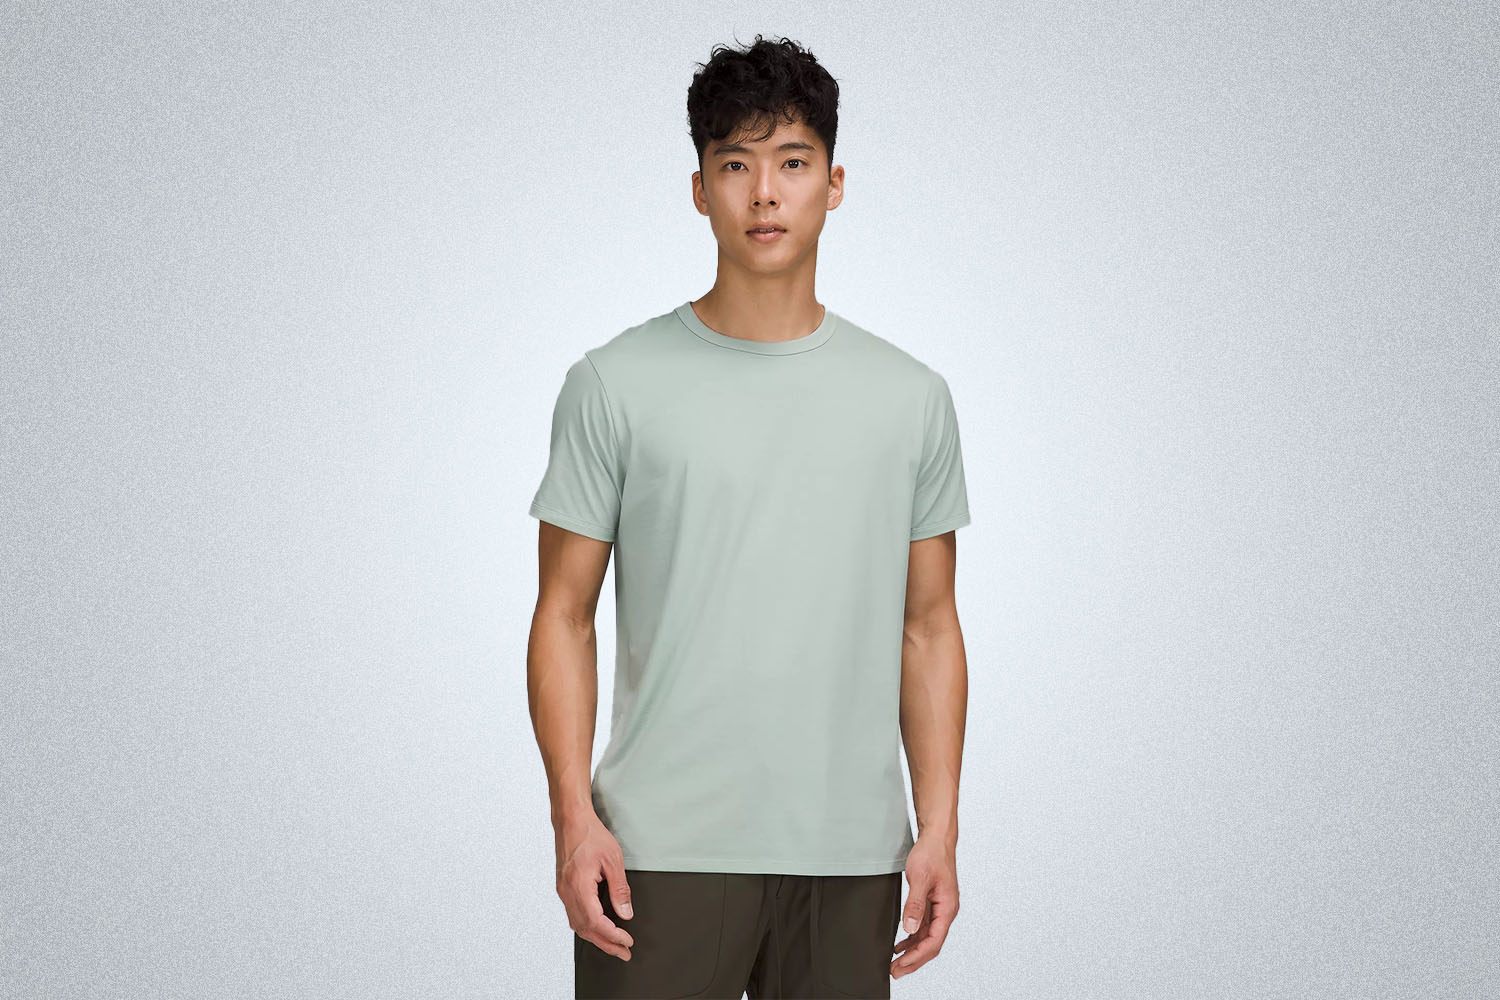 a model in a green lululemon shirt on a grey background